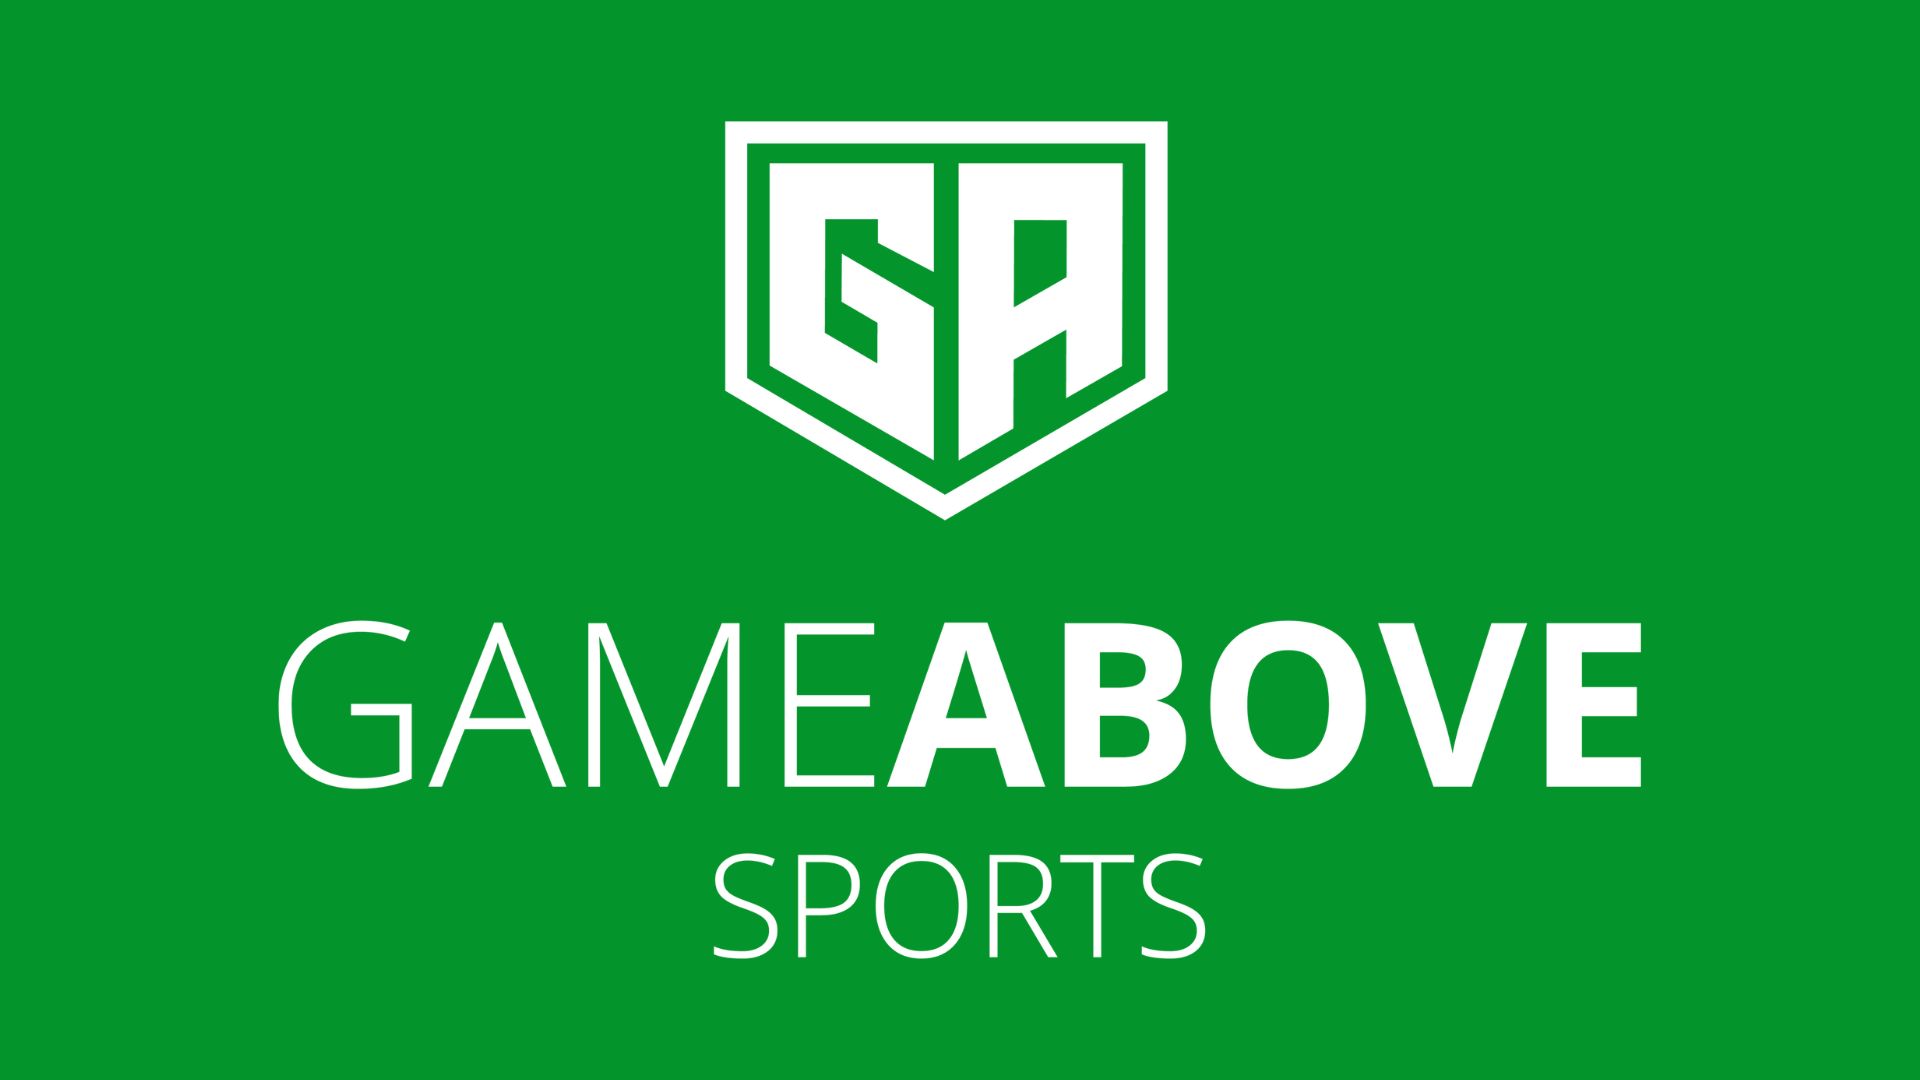 CapStone Holdings Inc. Launches GameAbove Sports